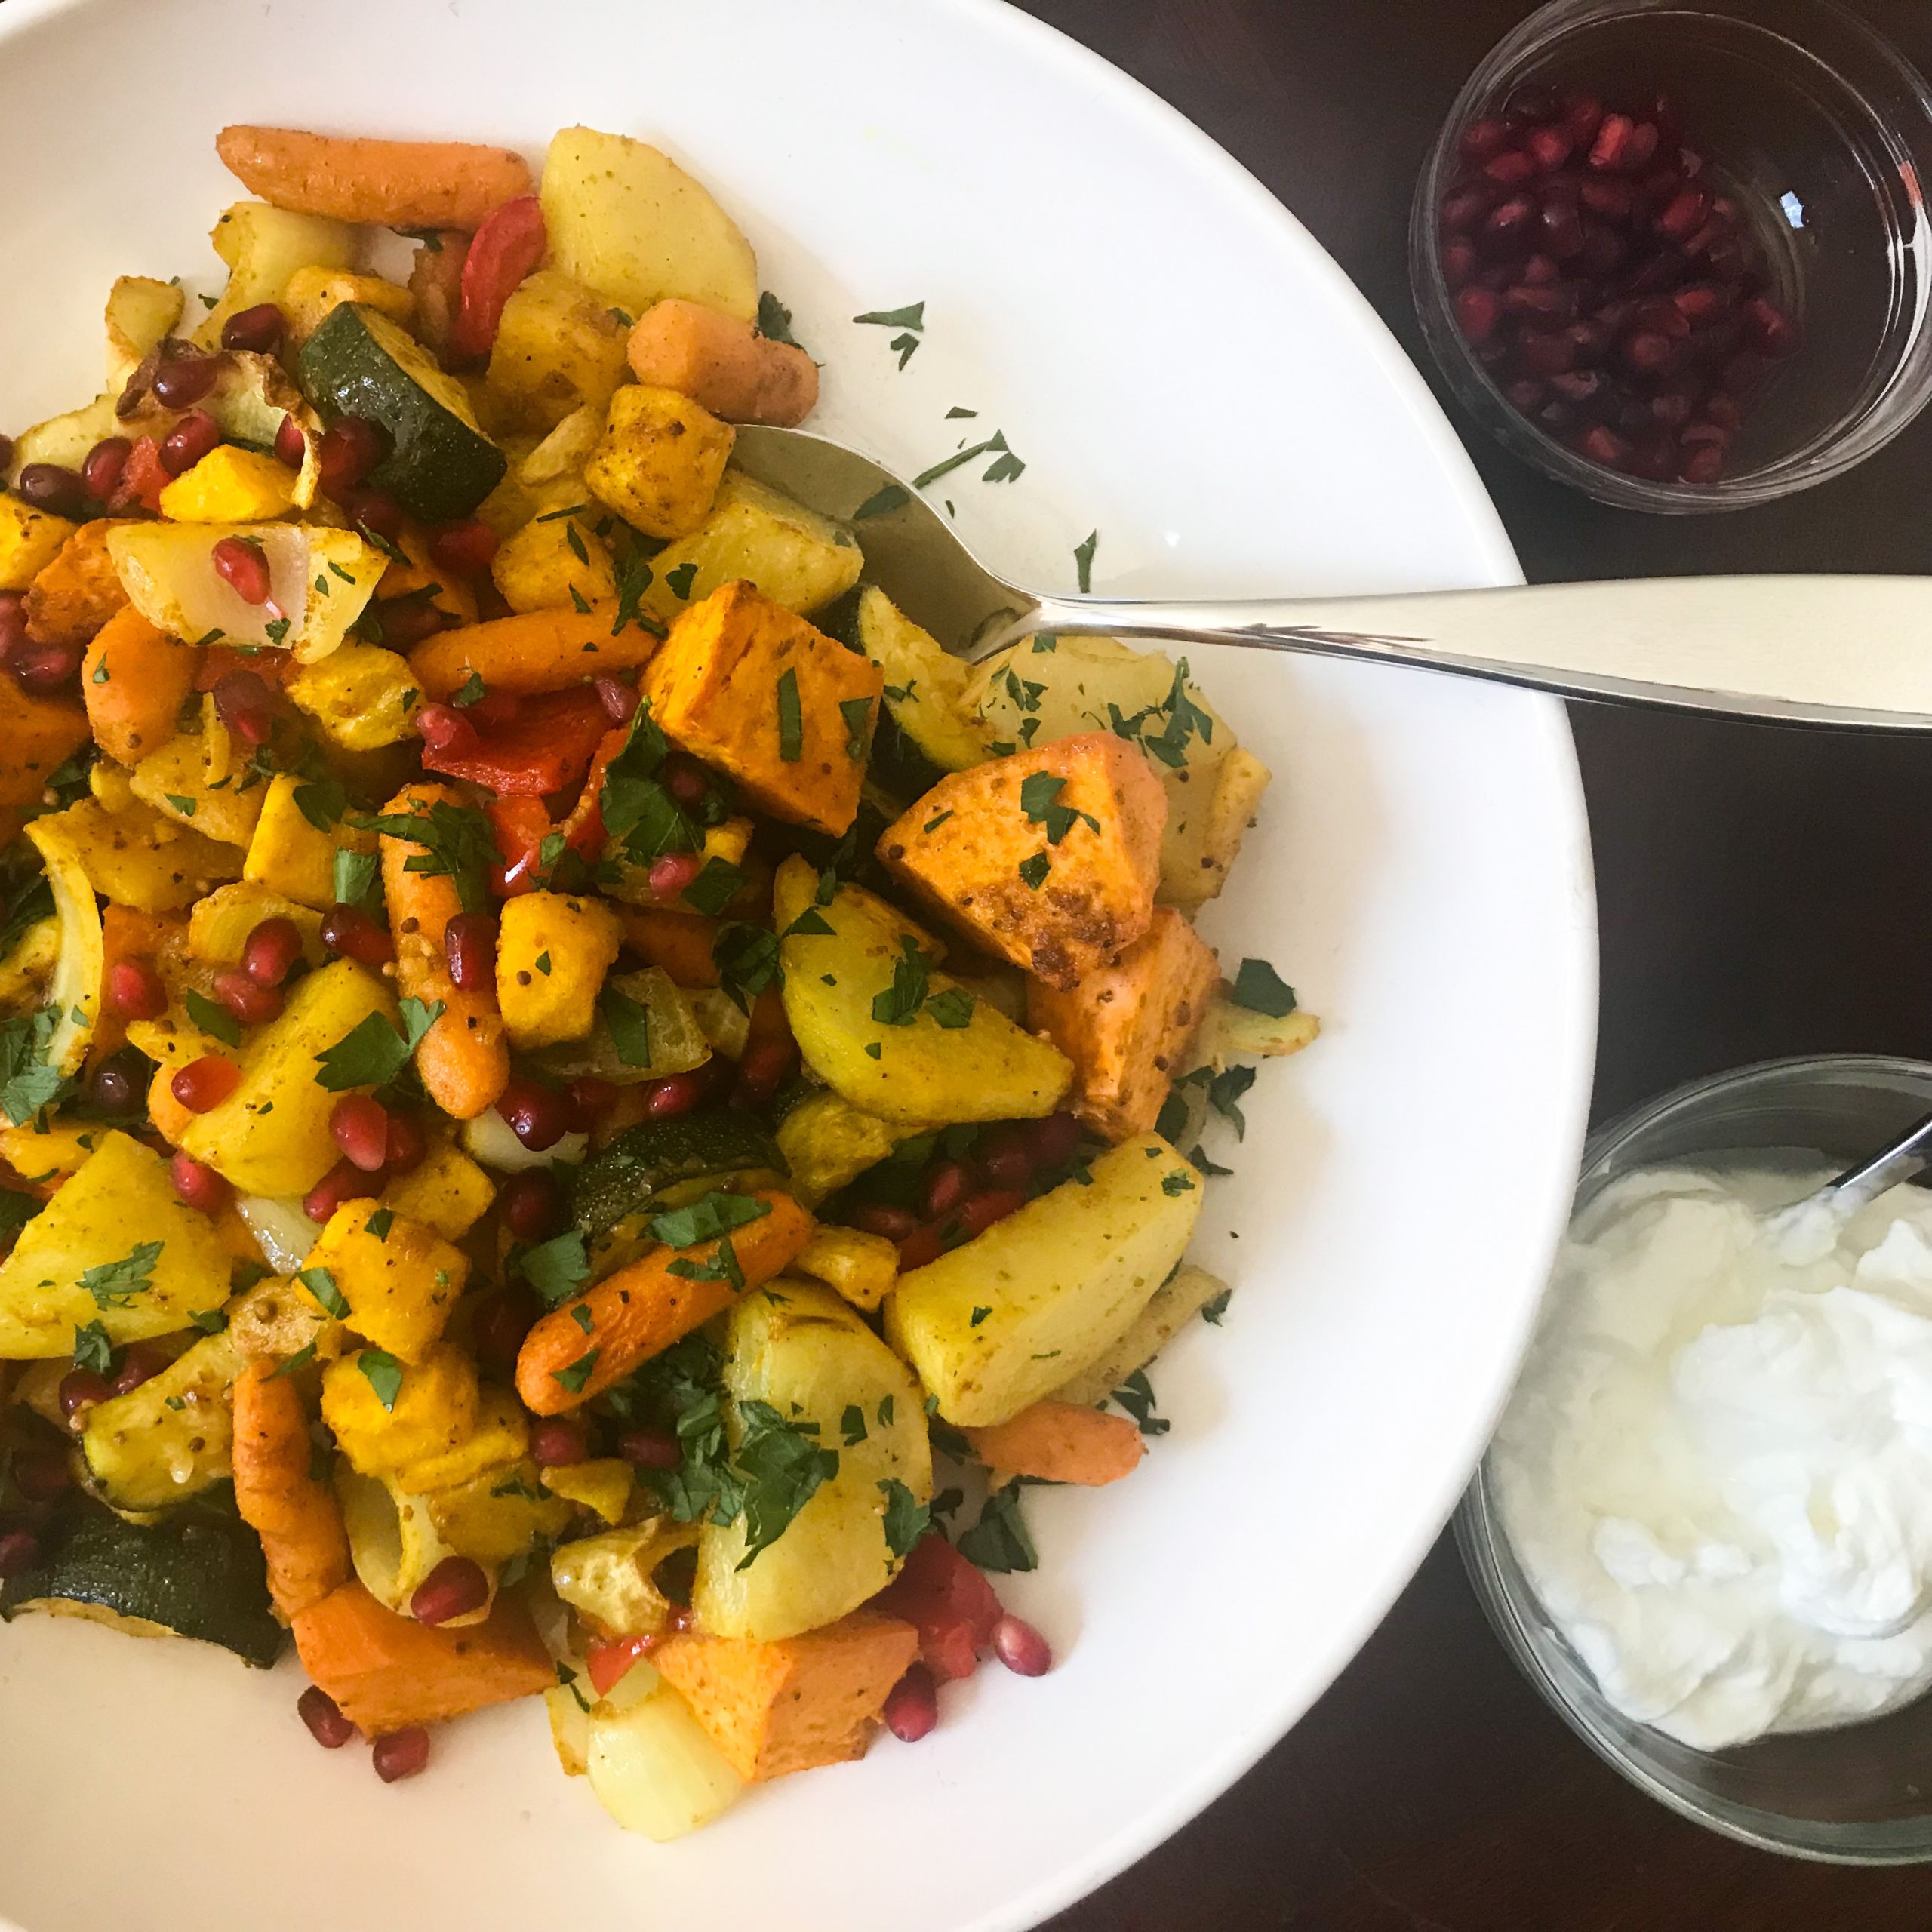 bowl of roasted vadouvan veggies and bowls of yogurt and pomegranate seeds